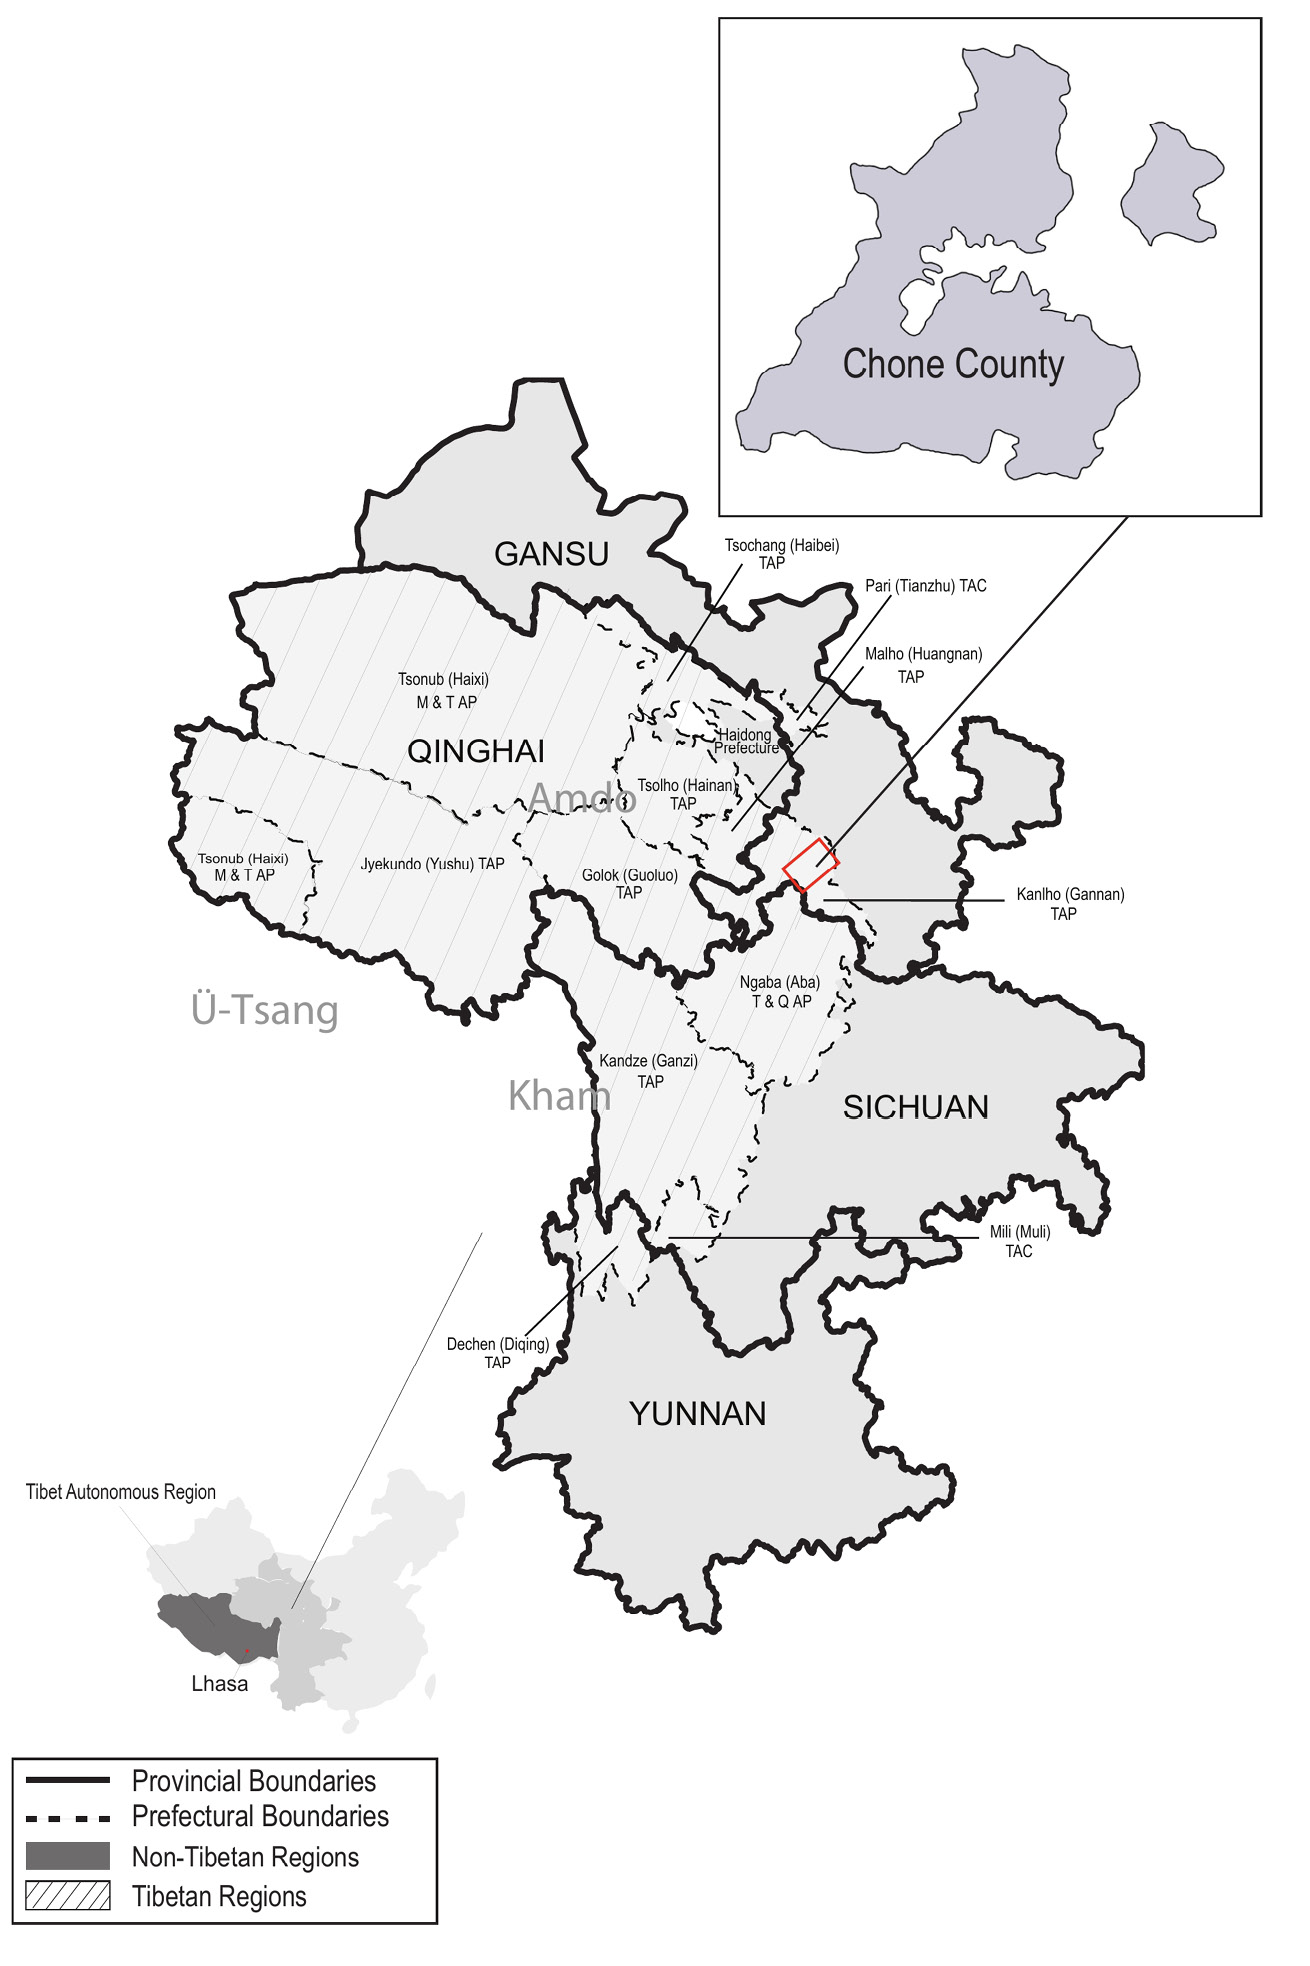 Fig. 5.1.  Map of Chone County as situated within Amdo, within China. Adapted from Kolås and Thowsen (2005: 2), CC BY-NC-ND. 